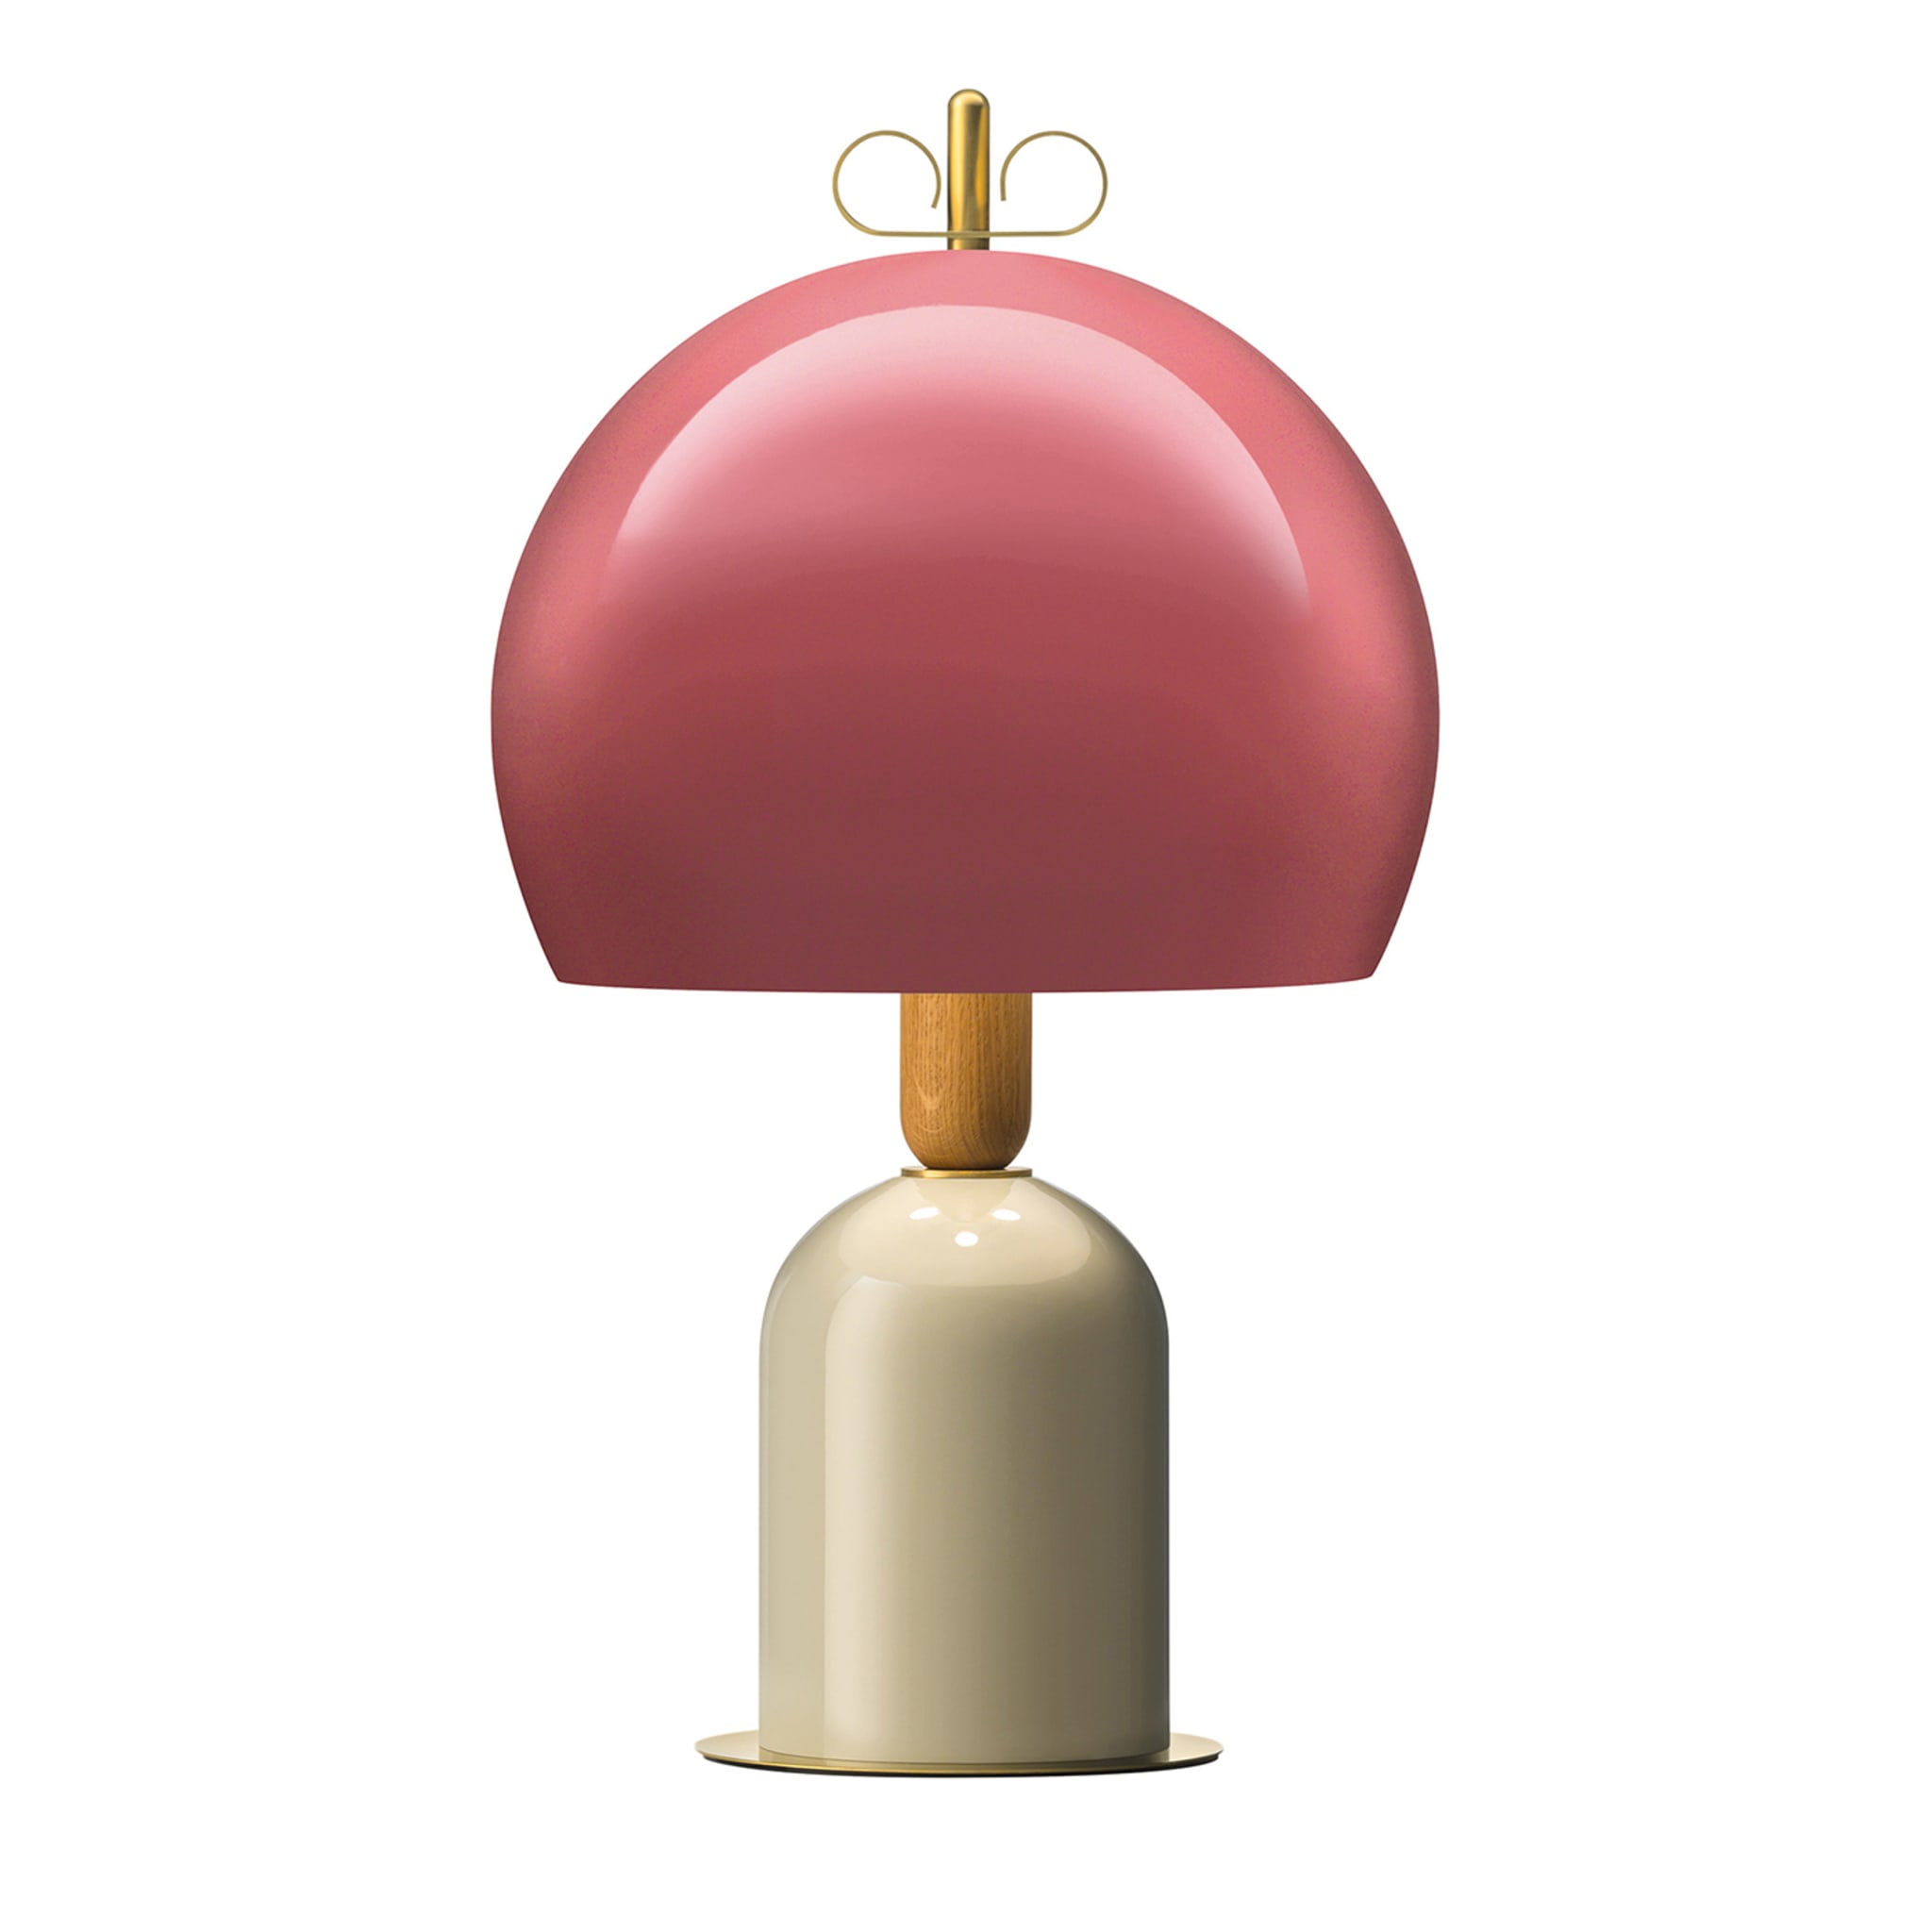 Bon Ton Rounded Pink Table Lamp by Cristina Celestino - Main view